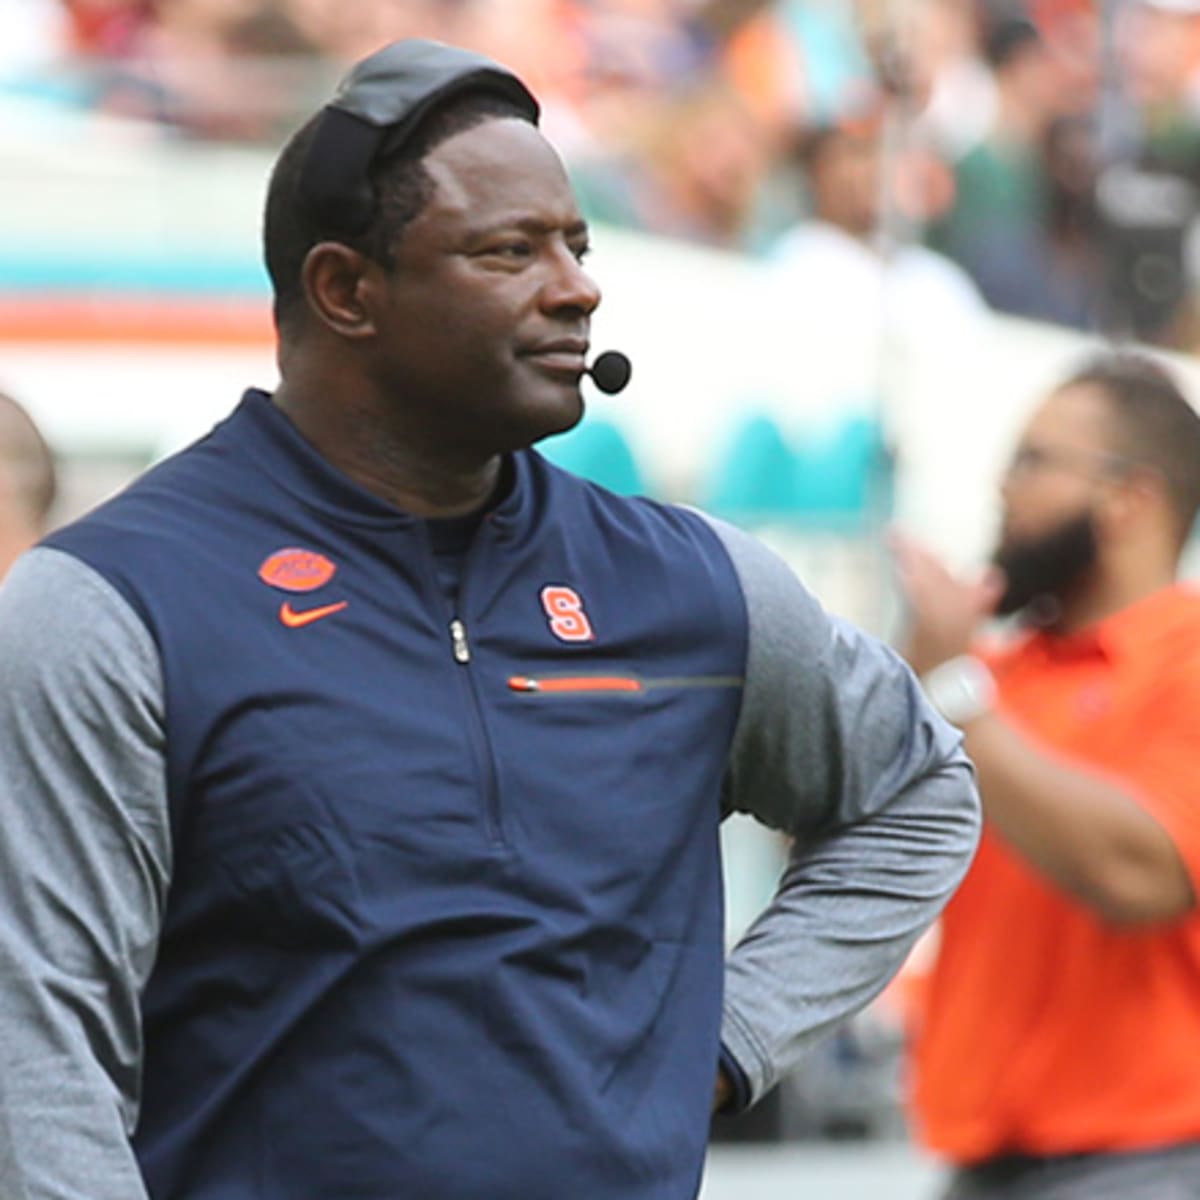 Syracuse University would owe football coach Dino Babers over $10